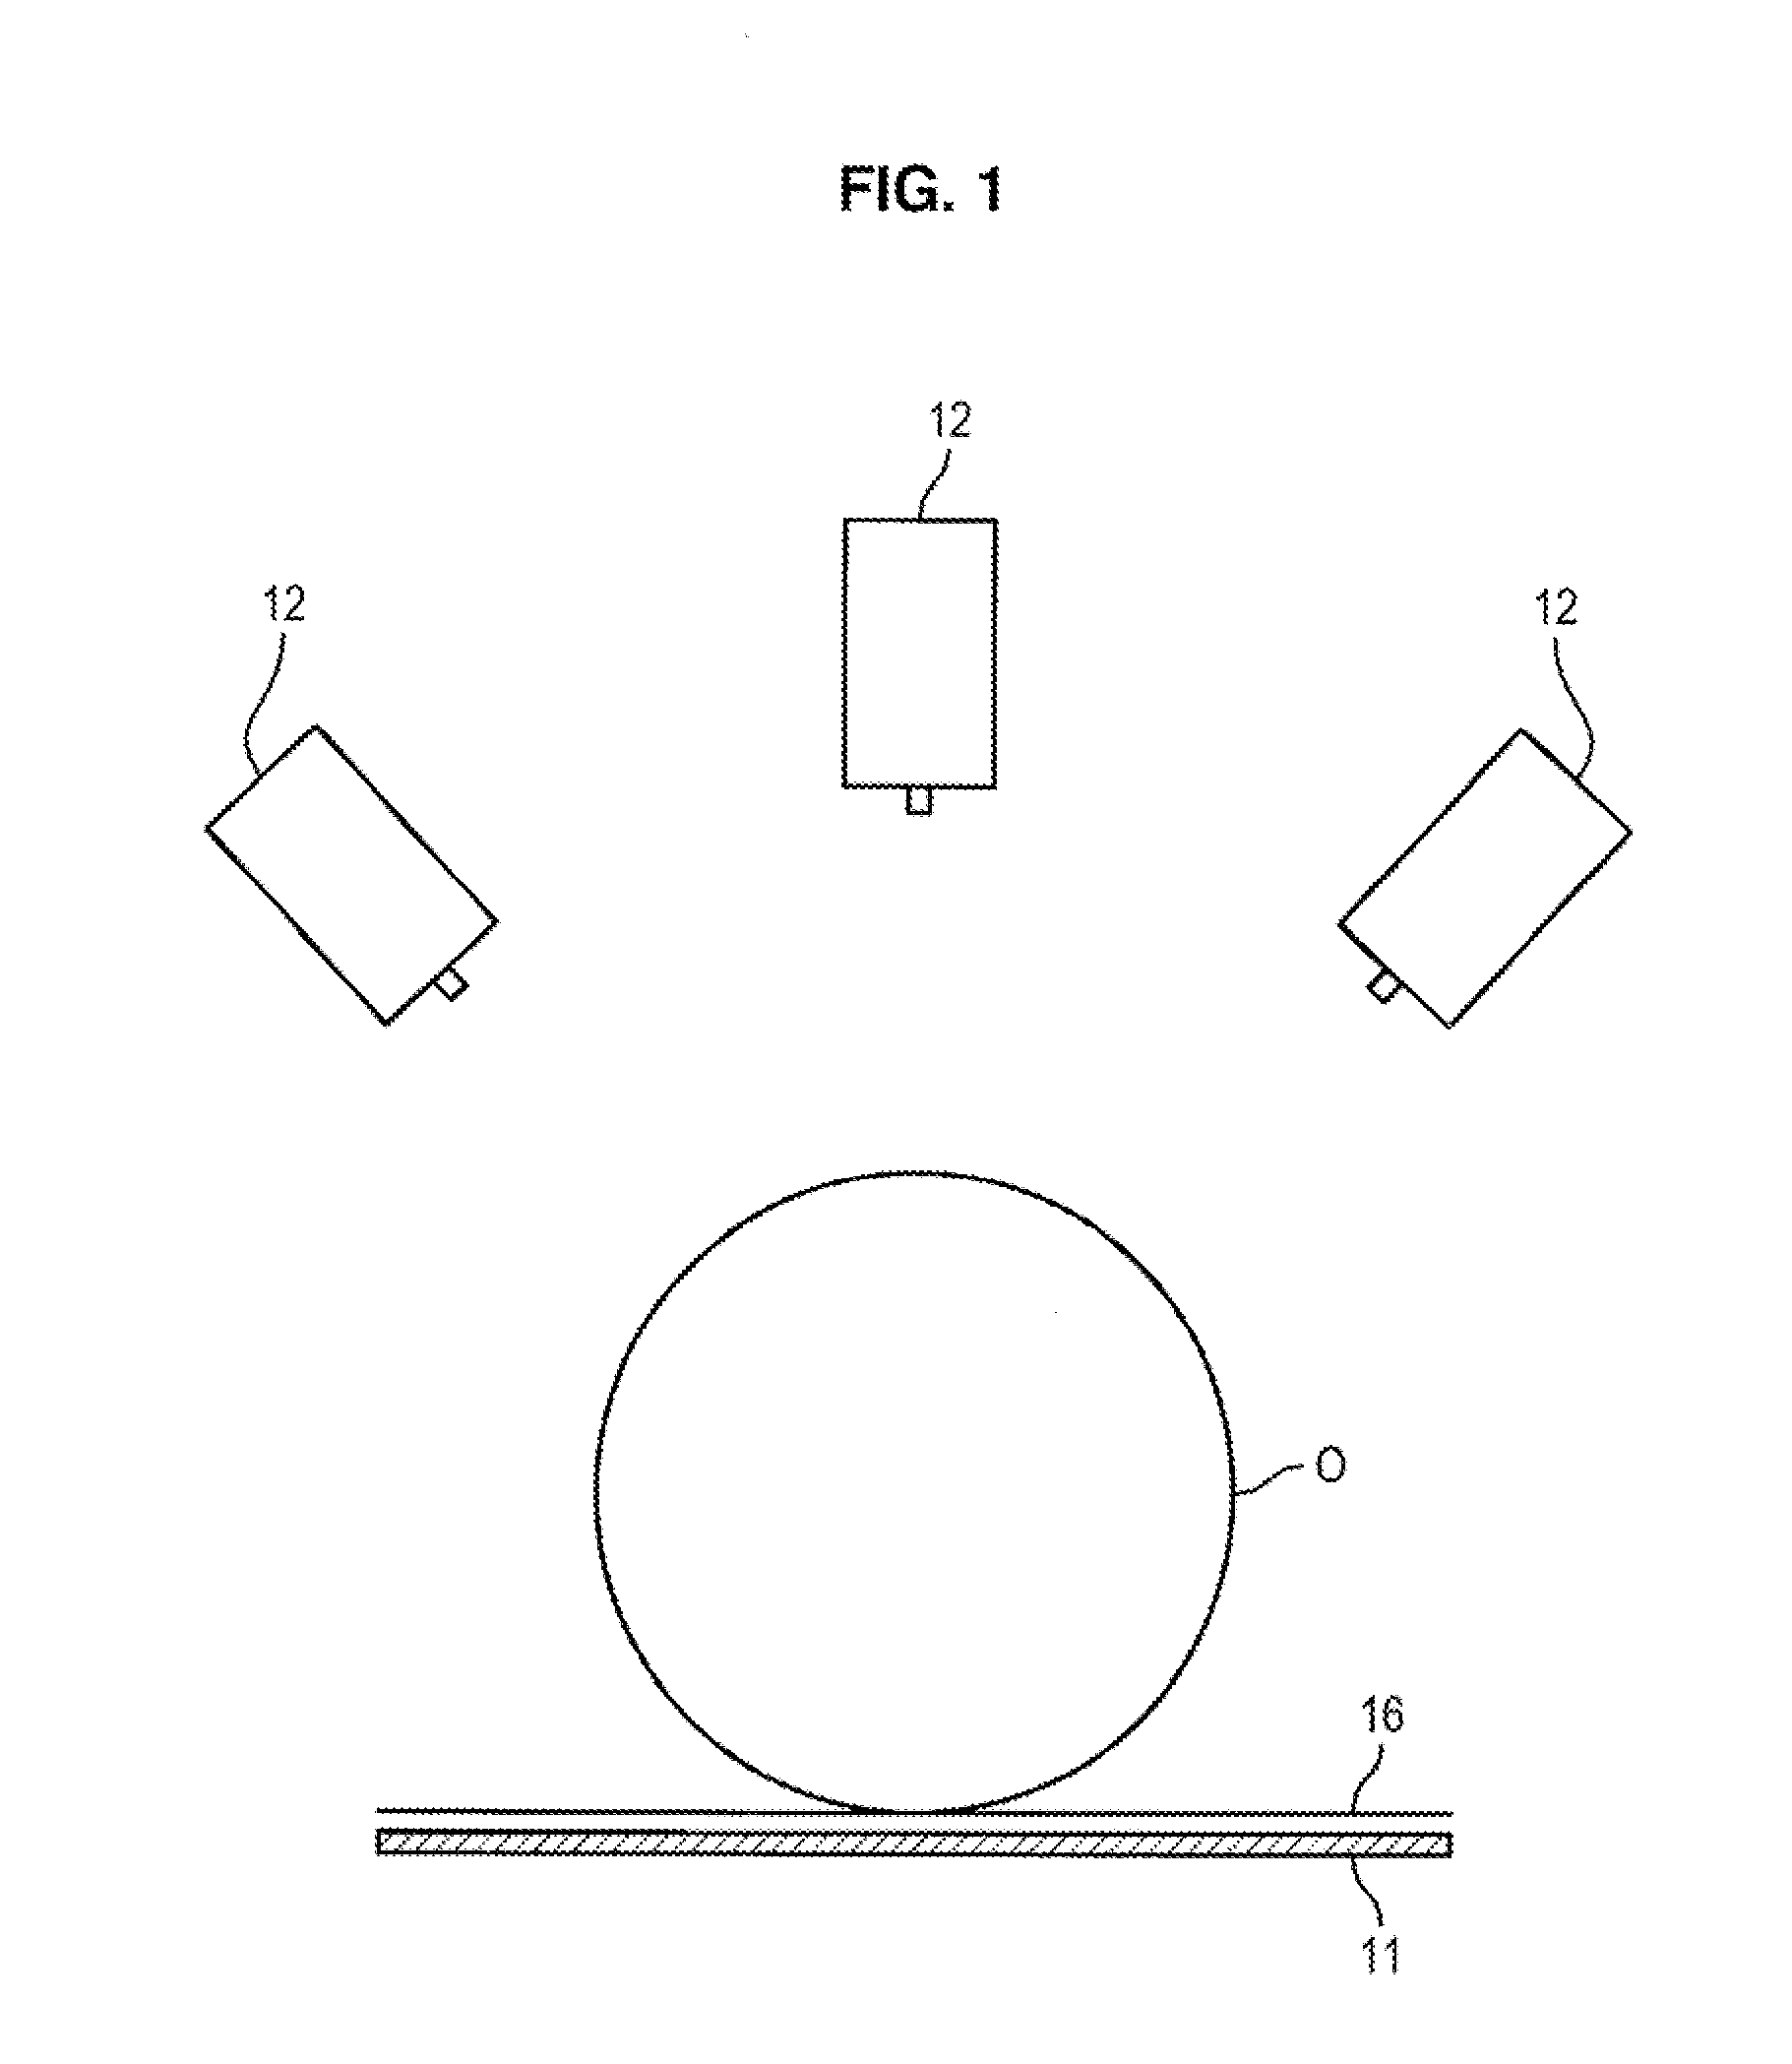 Method, system and computer program product to process a set of tomosynthesis slices